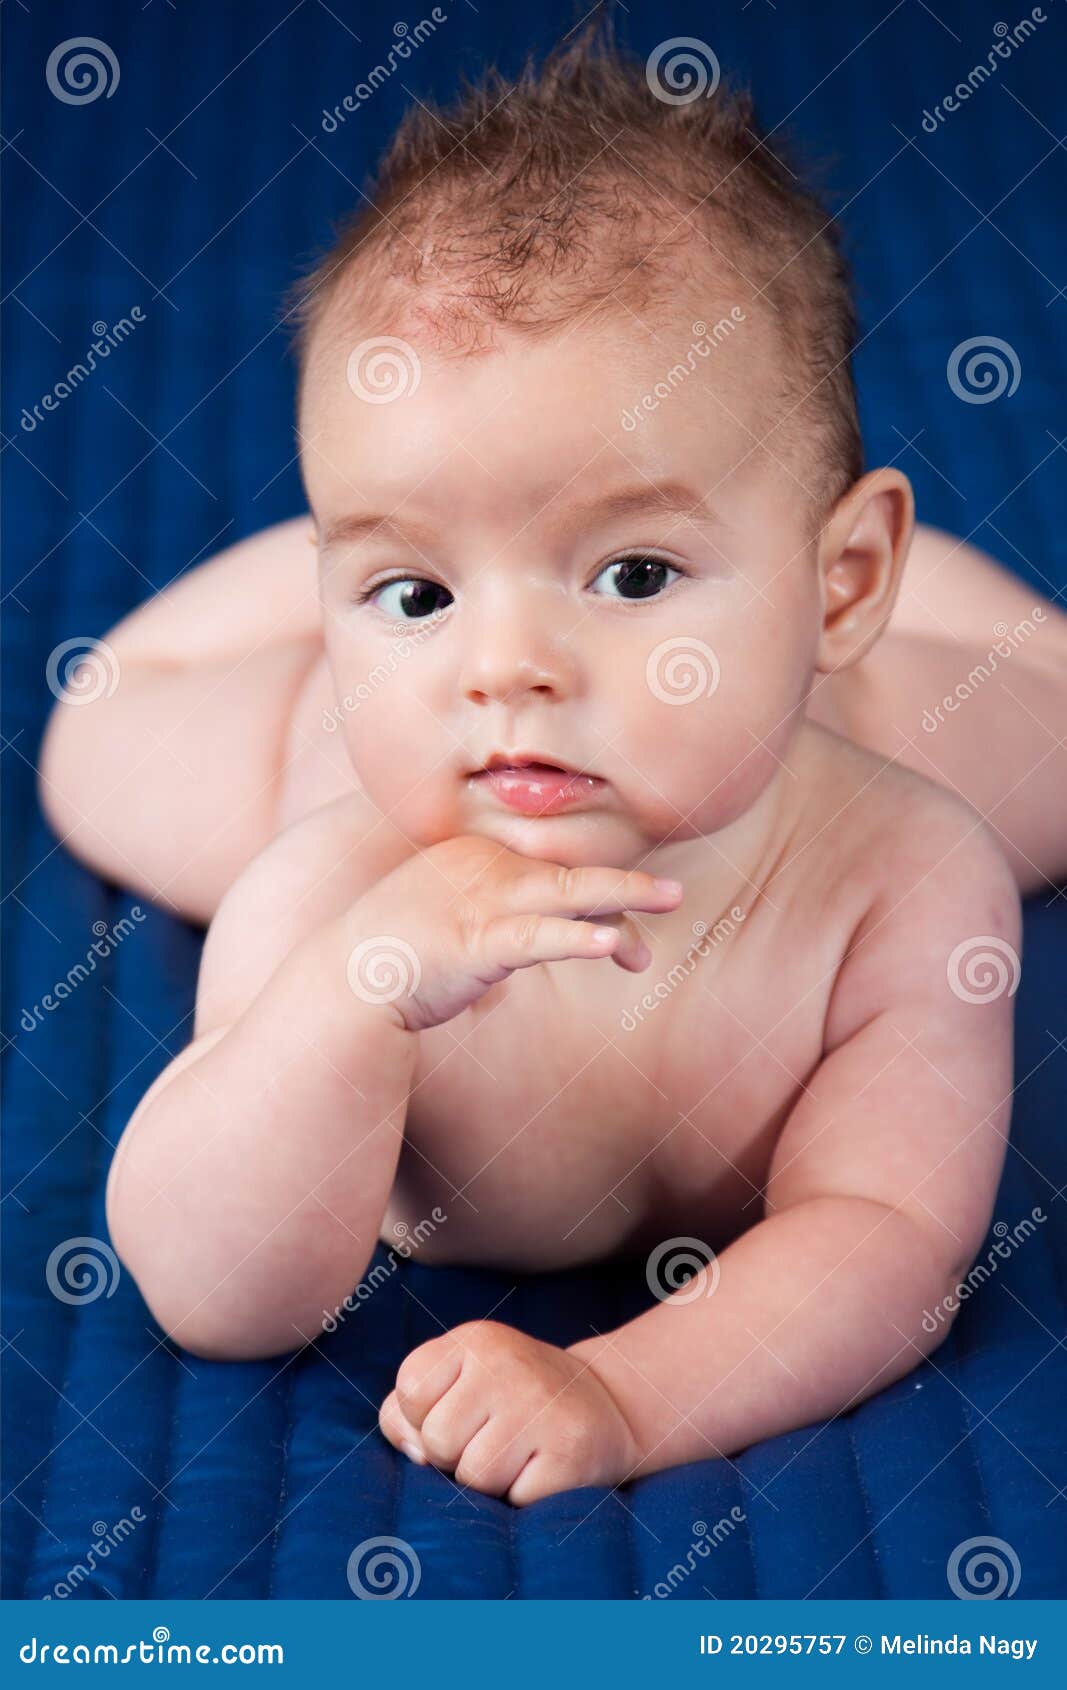 Closeup Portrait Of Cute Smiling Baby Boy Royalty Free ...